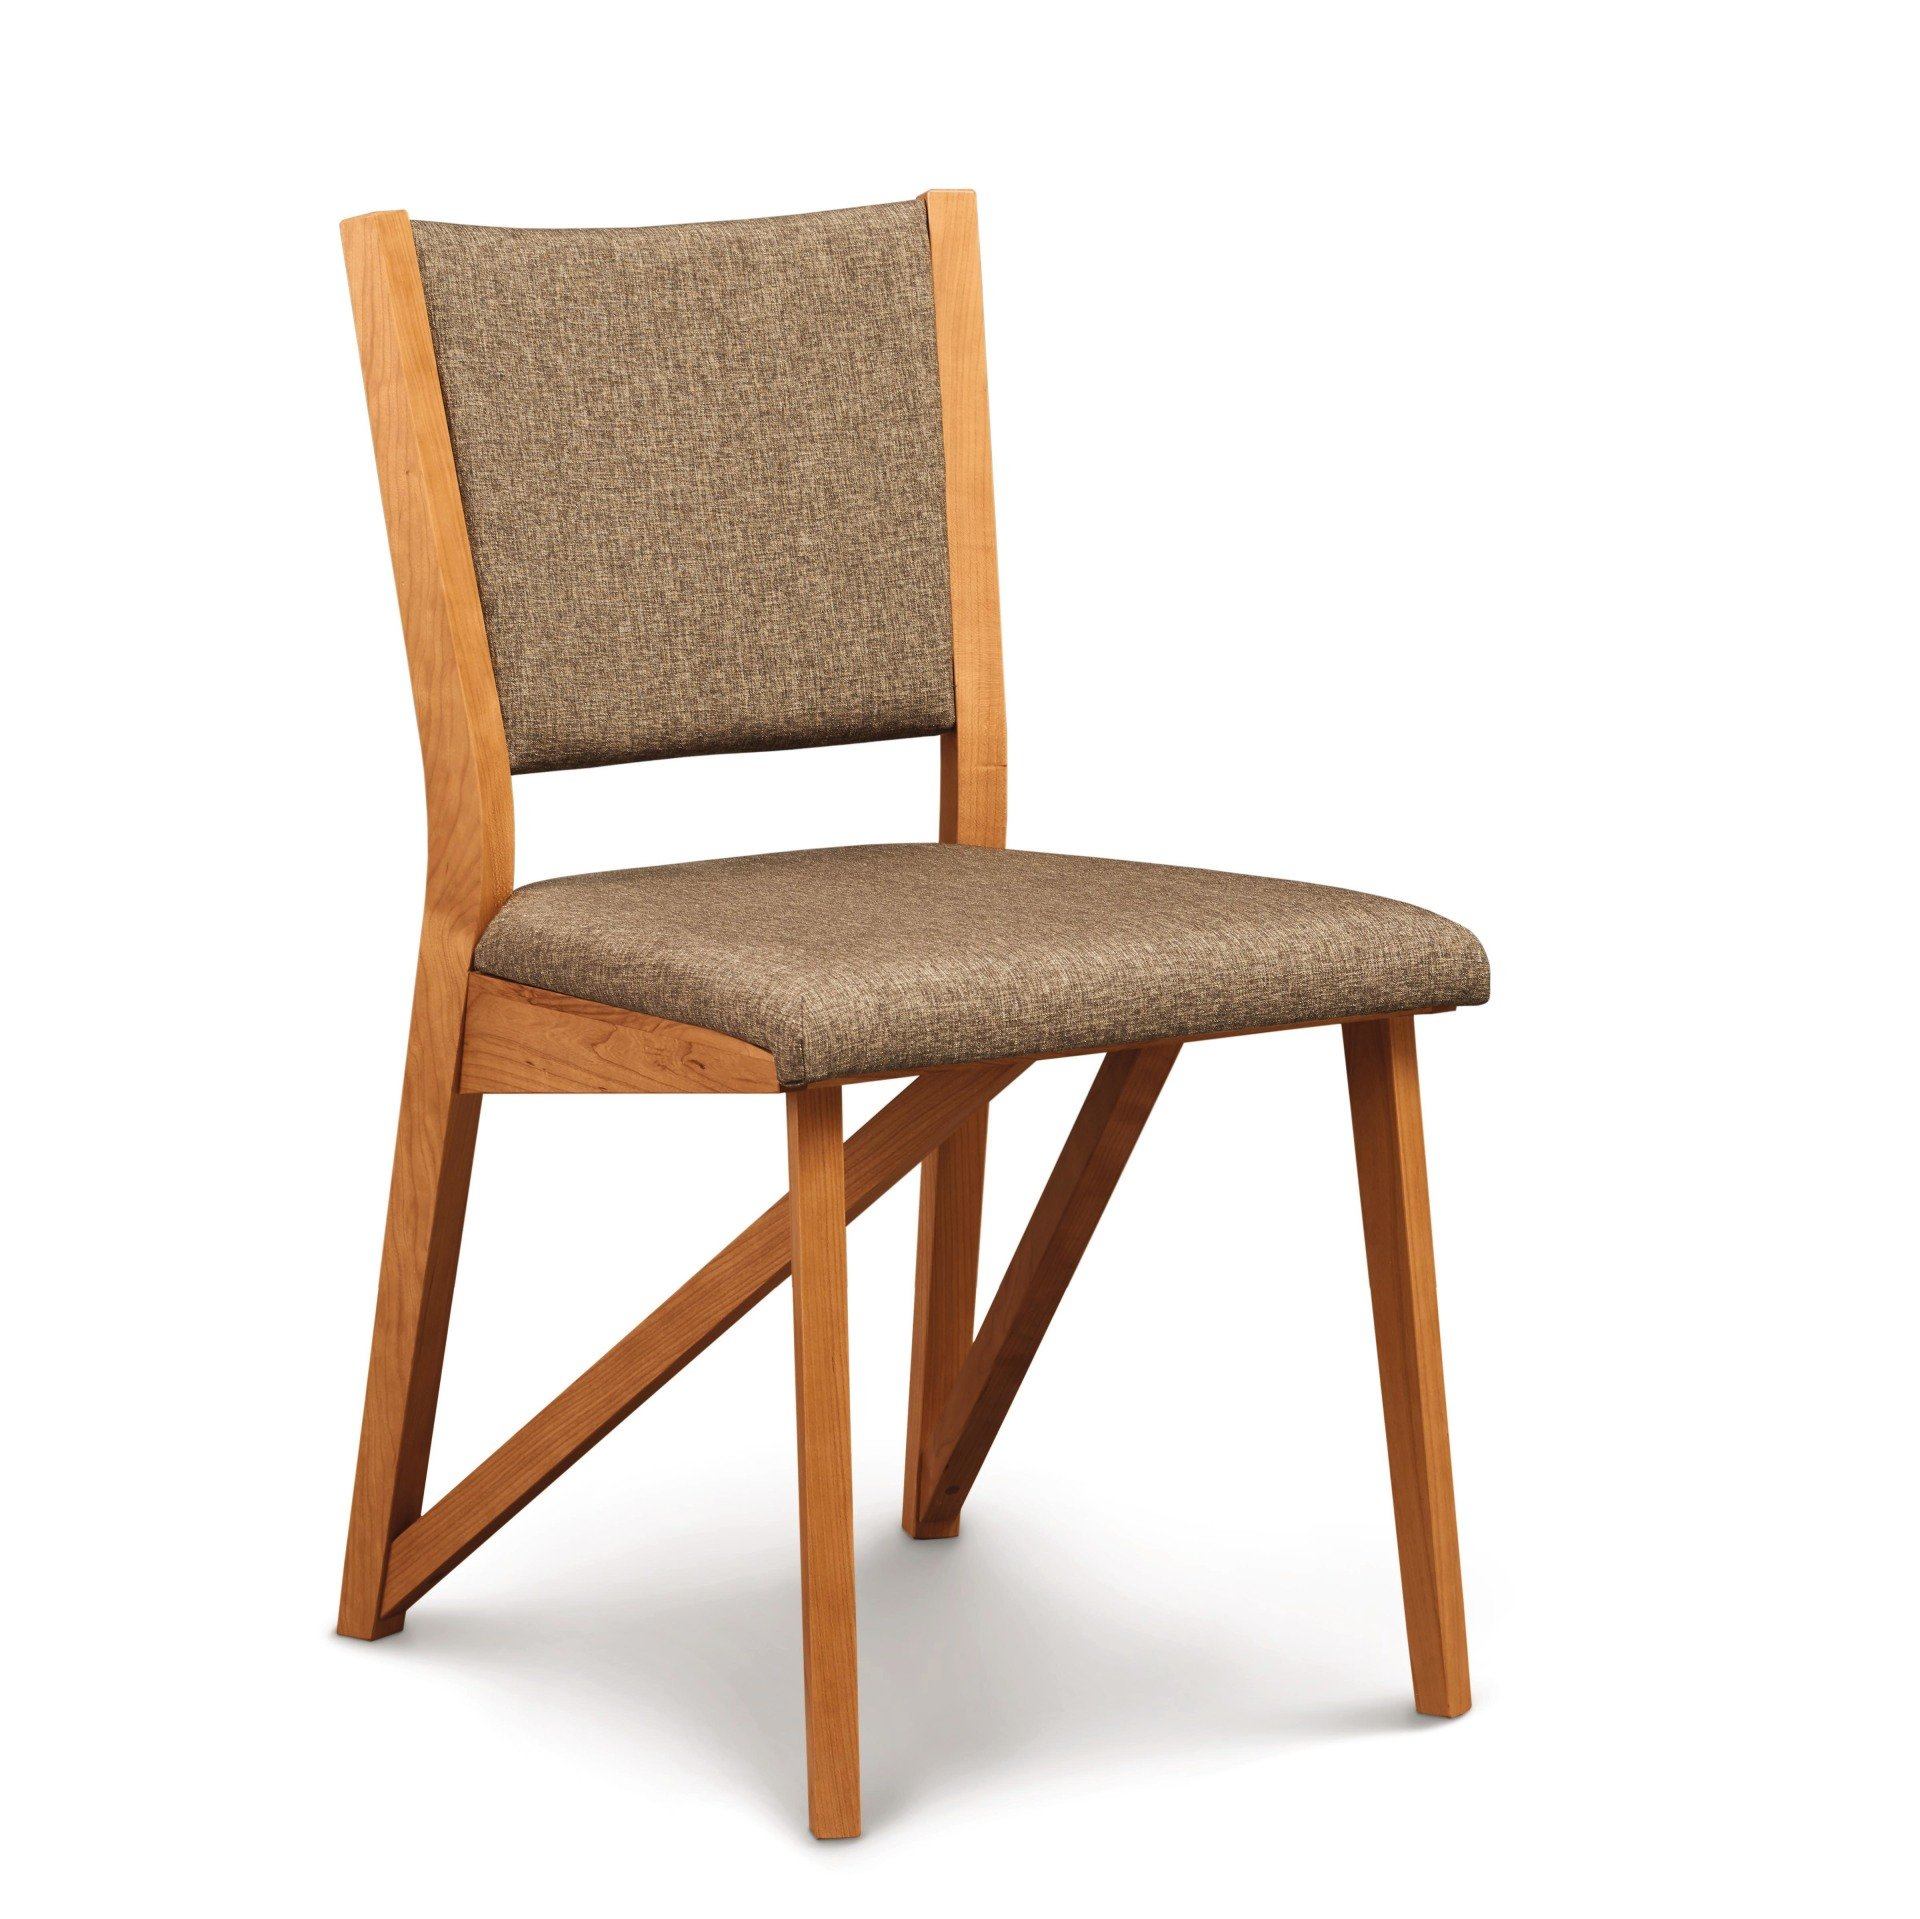 8-EXE-50-XX Exeter chair